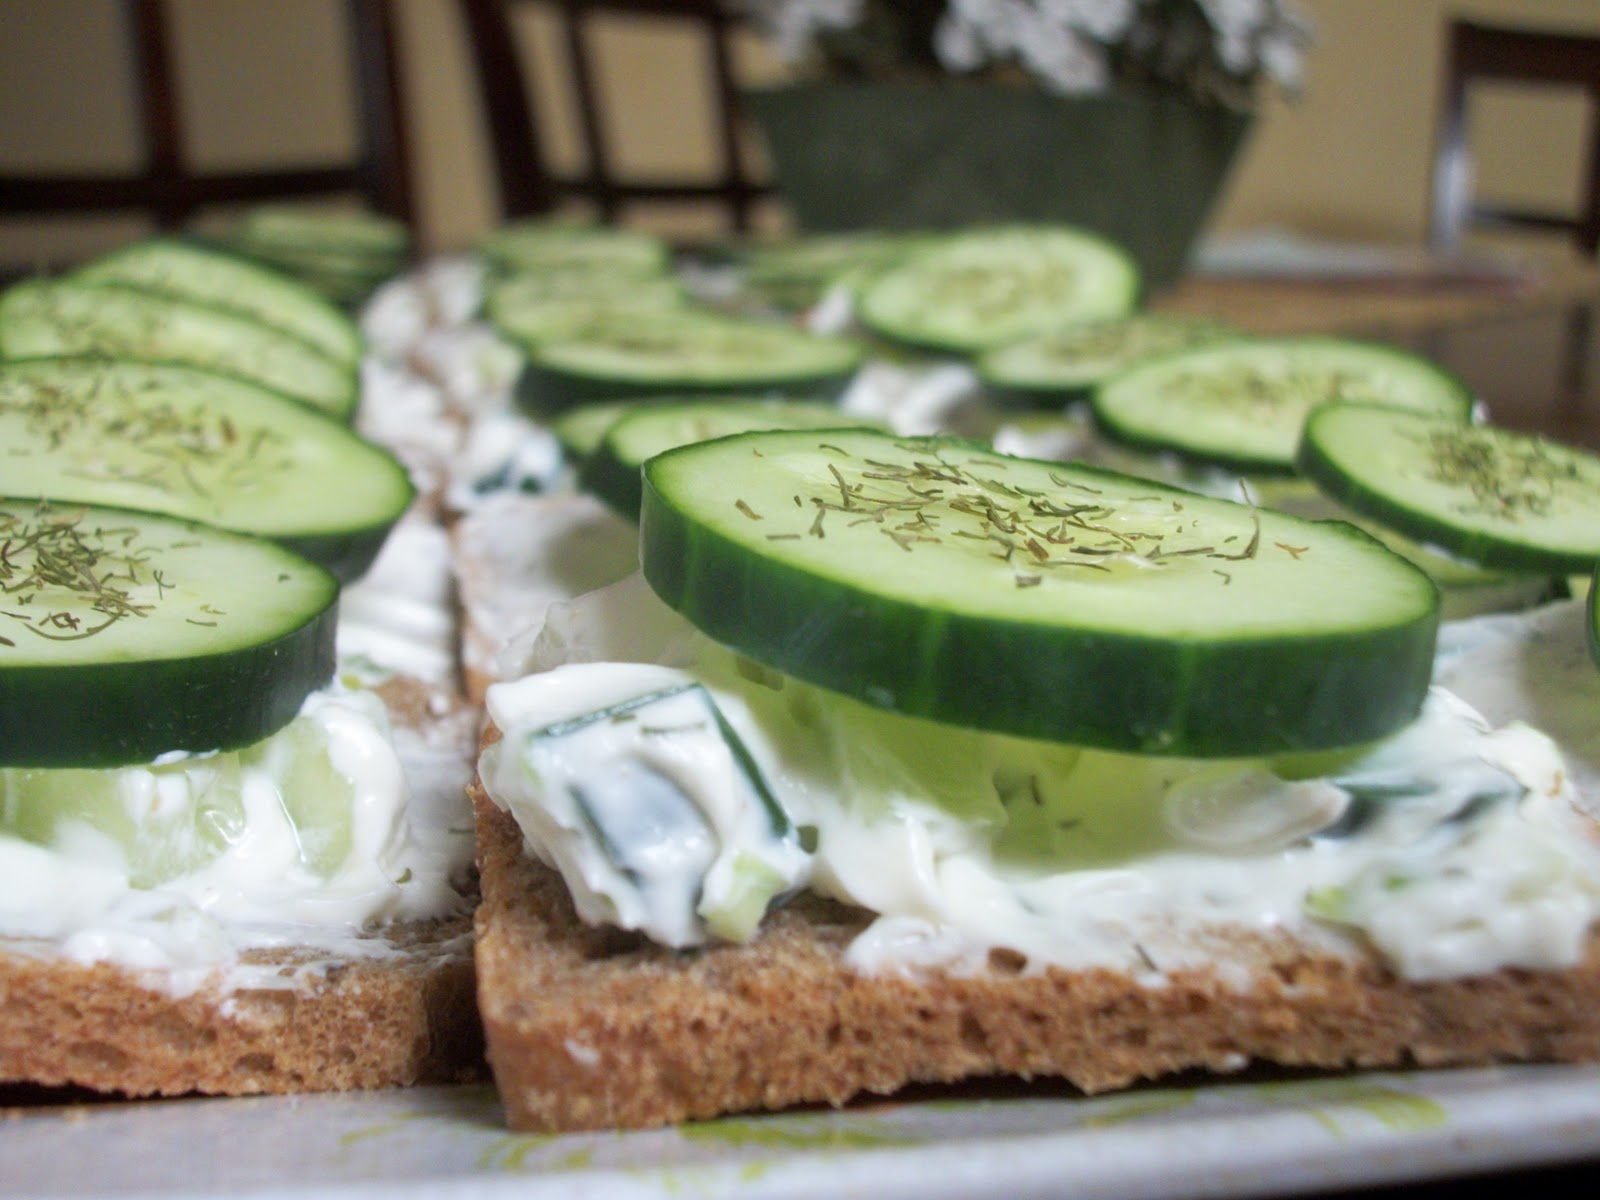 Cooking & Baking with a Passion: Cucumber Sandwiches